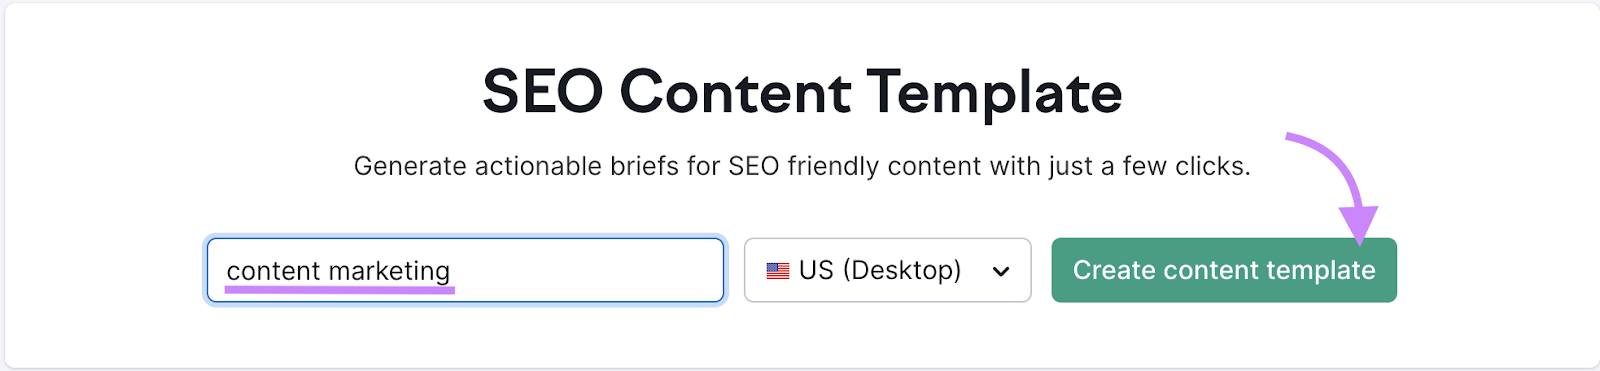 "content marketing" entered into SEO Content Template search bar